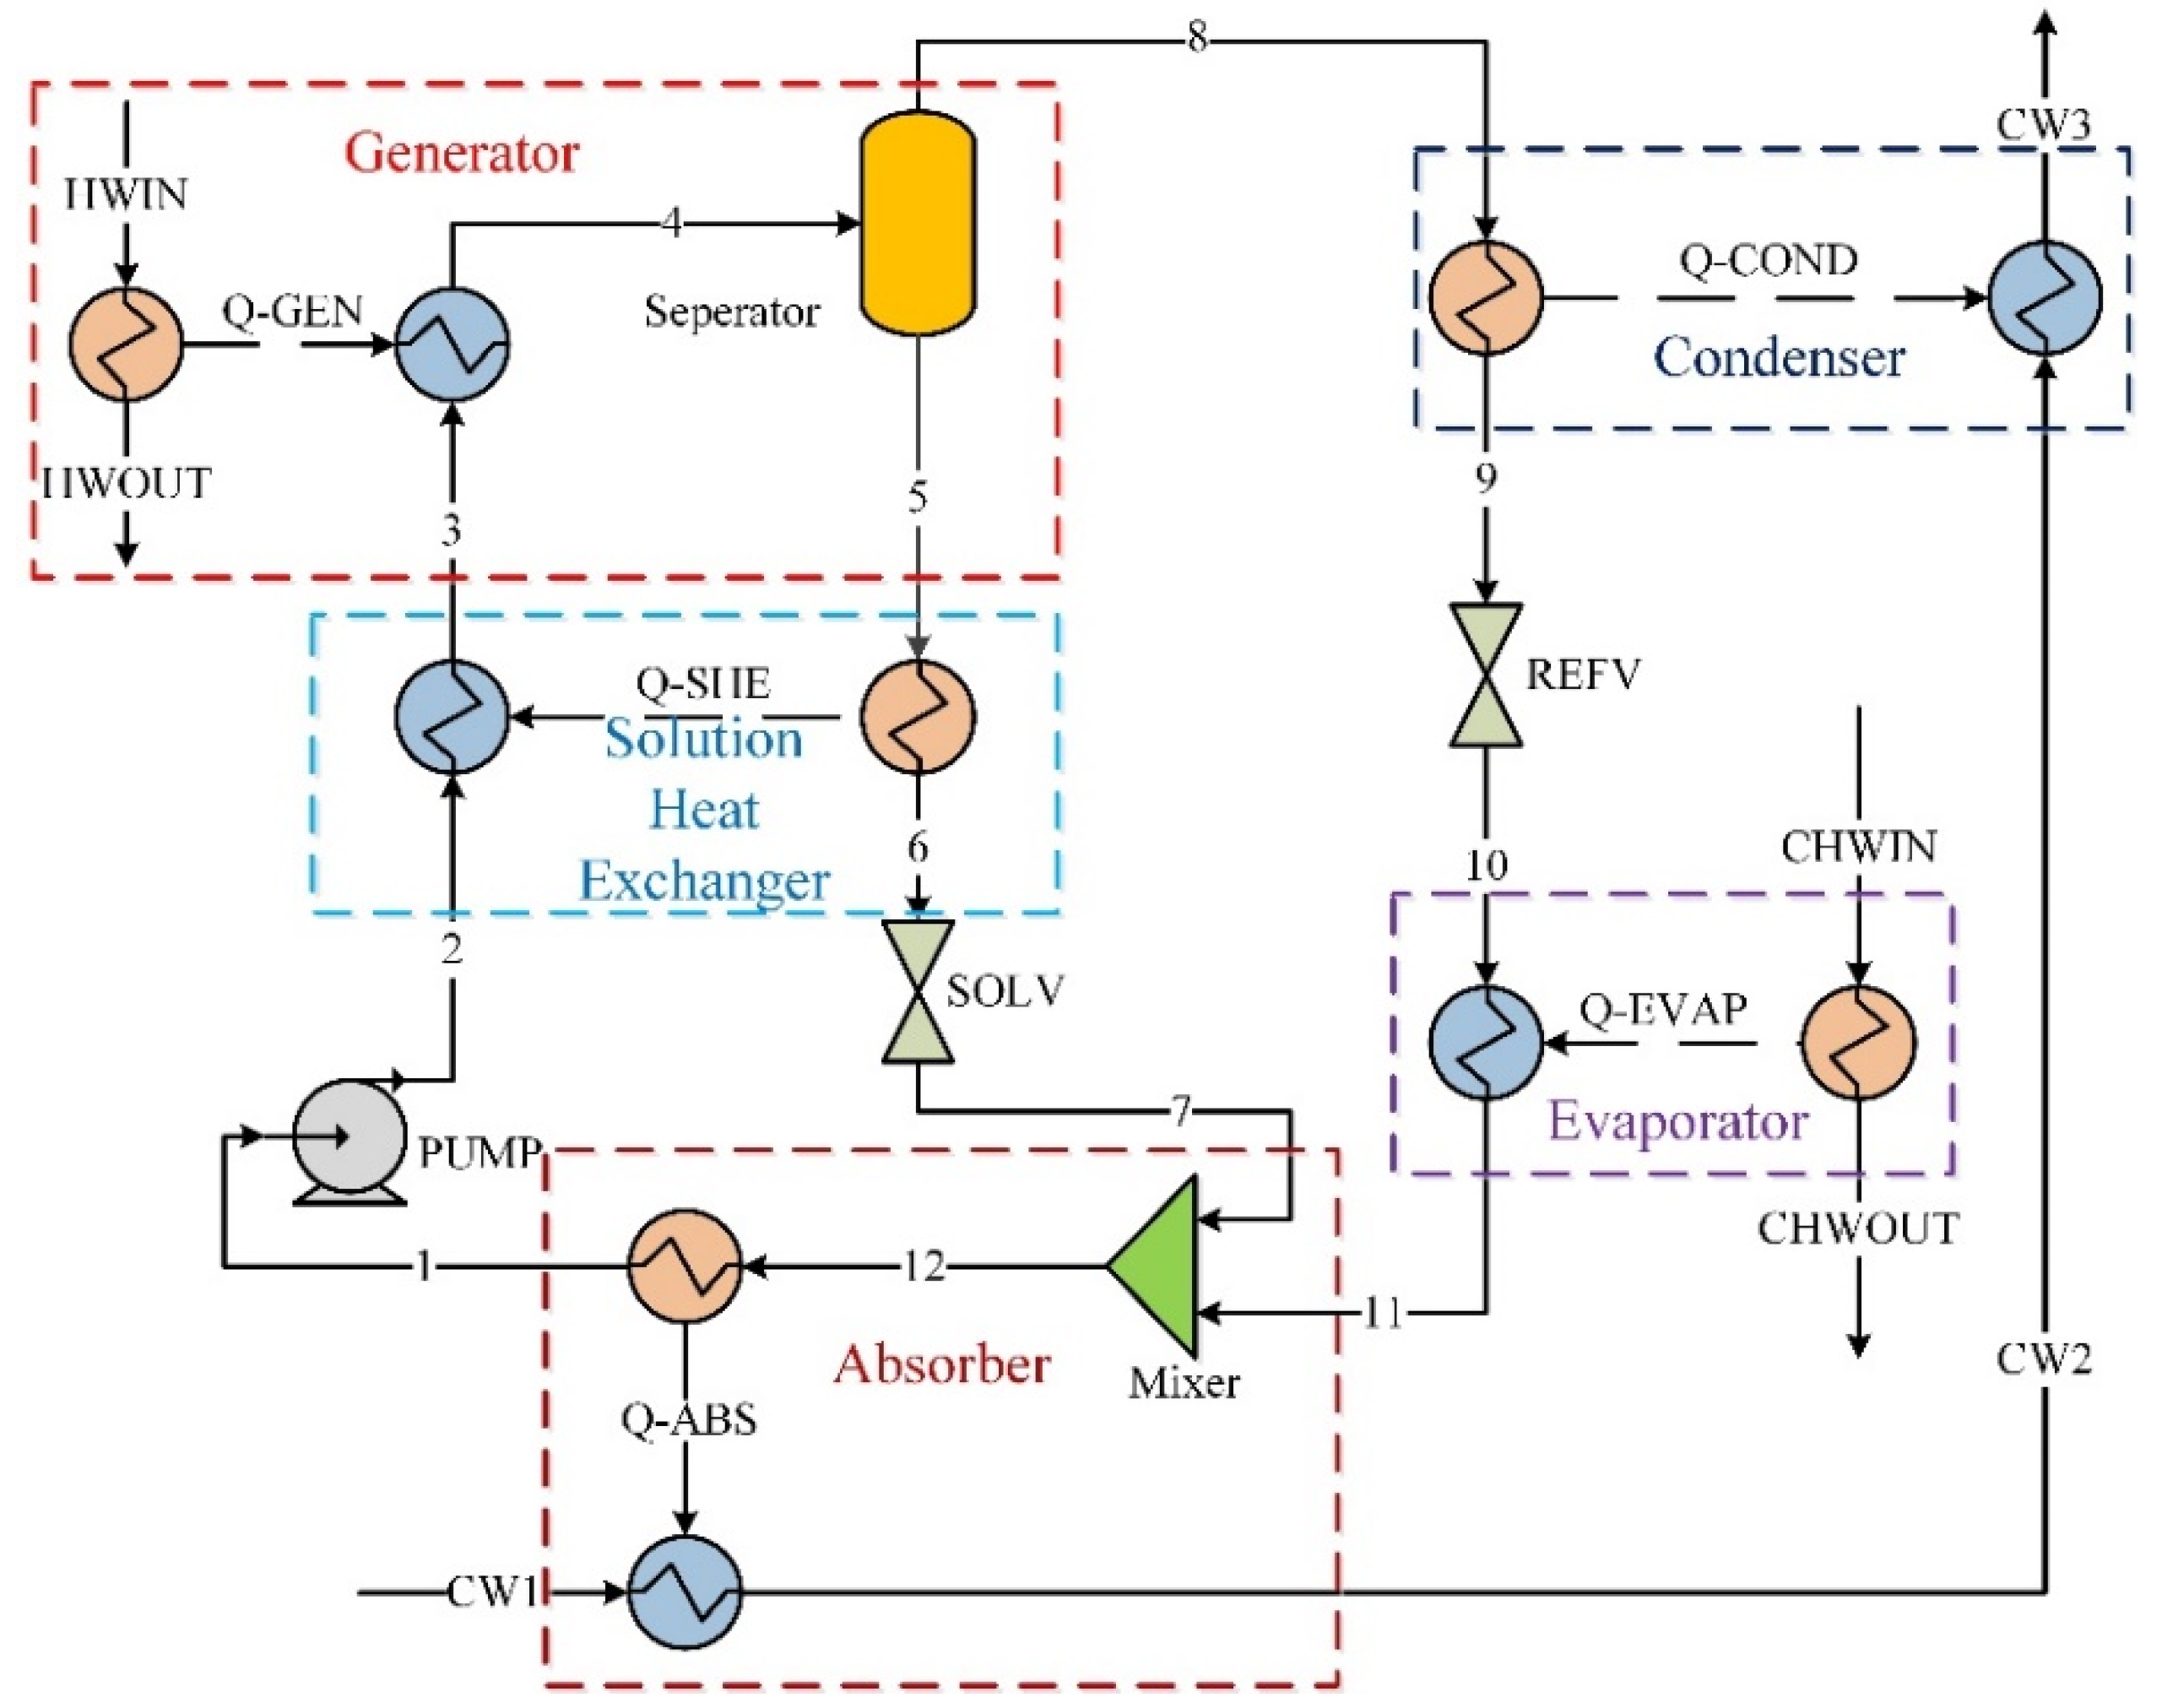 Processes | Free Full-Text | Optimization of Cascade Cooling System Based  on Lithium Bromide Refrigeration in the Polysilicon Industry | HTML